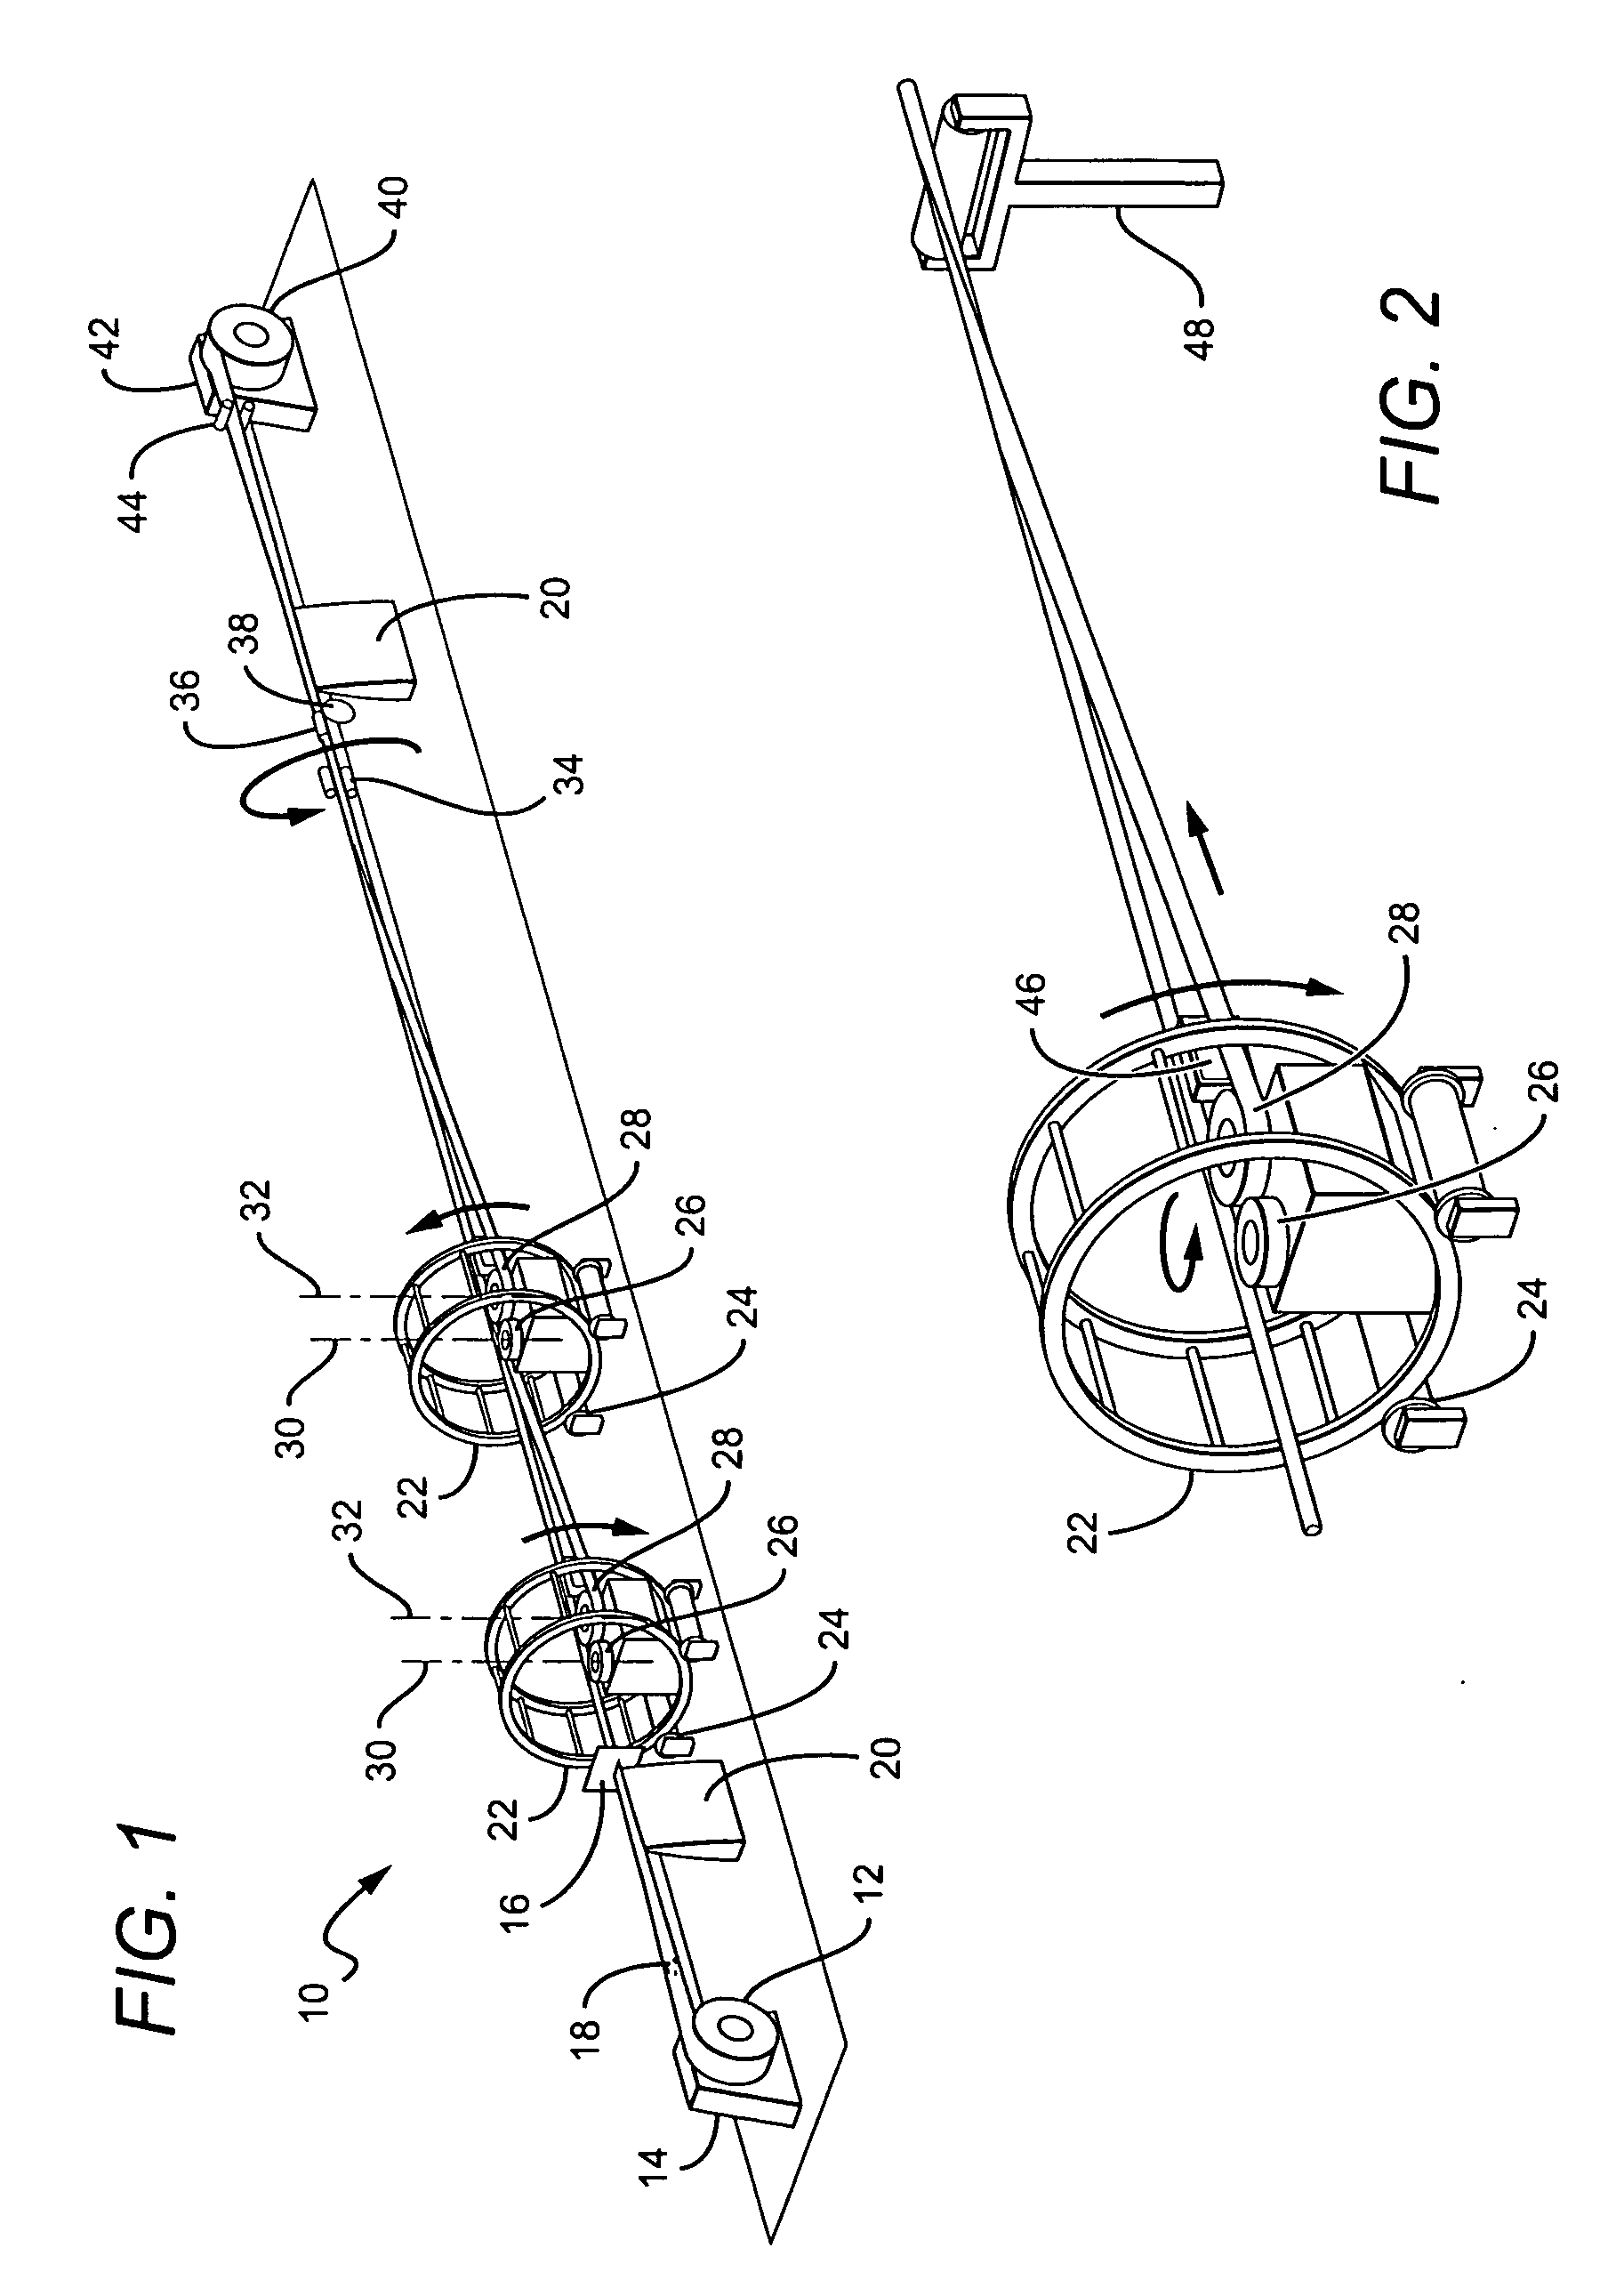 Method and apparatus for producing off-axis composite prepreg material